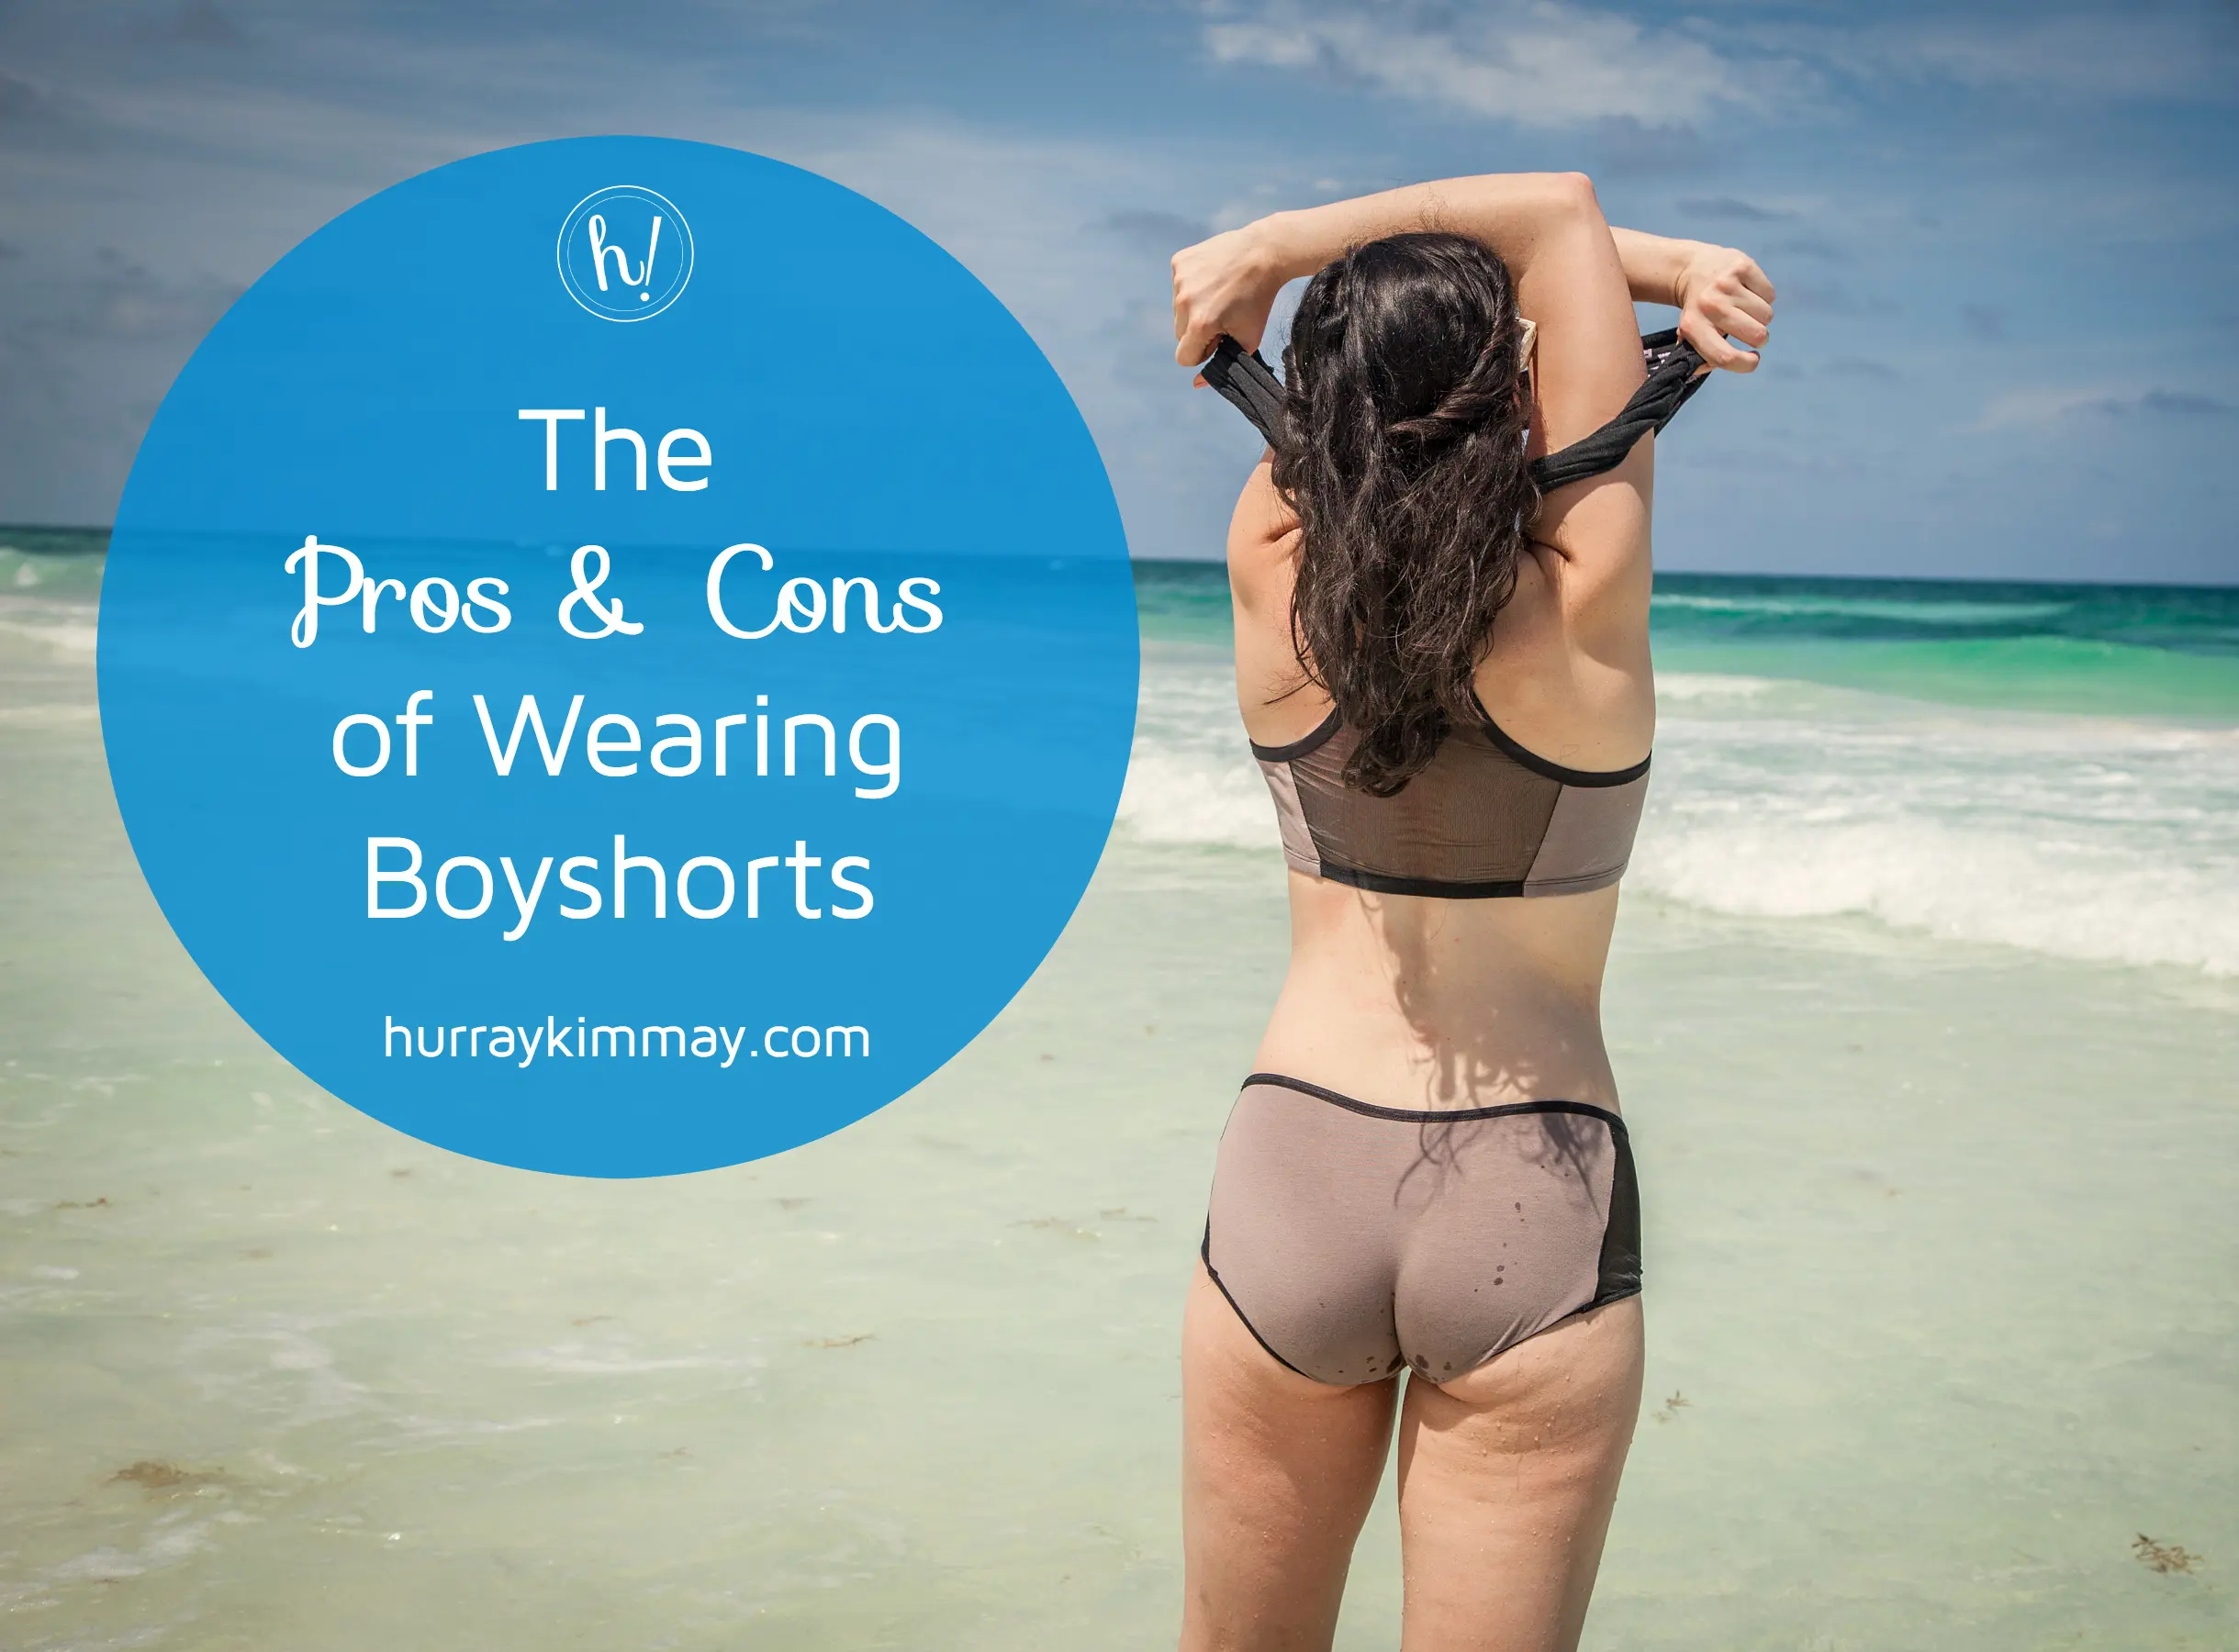 Can boyshort panties pass on as a guy's underwear? Can a guy wear